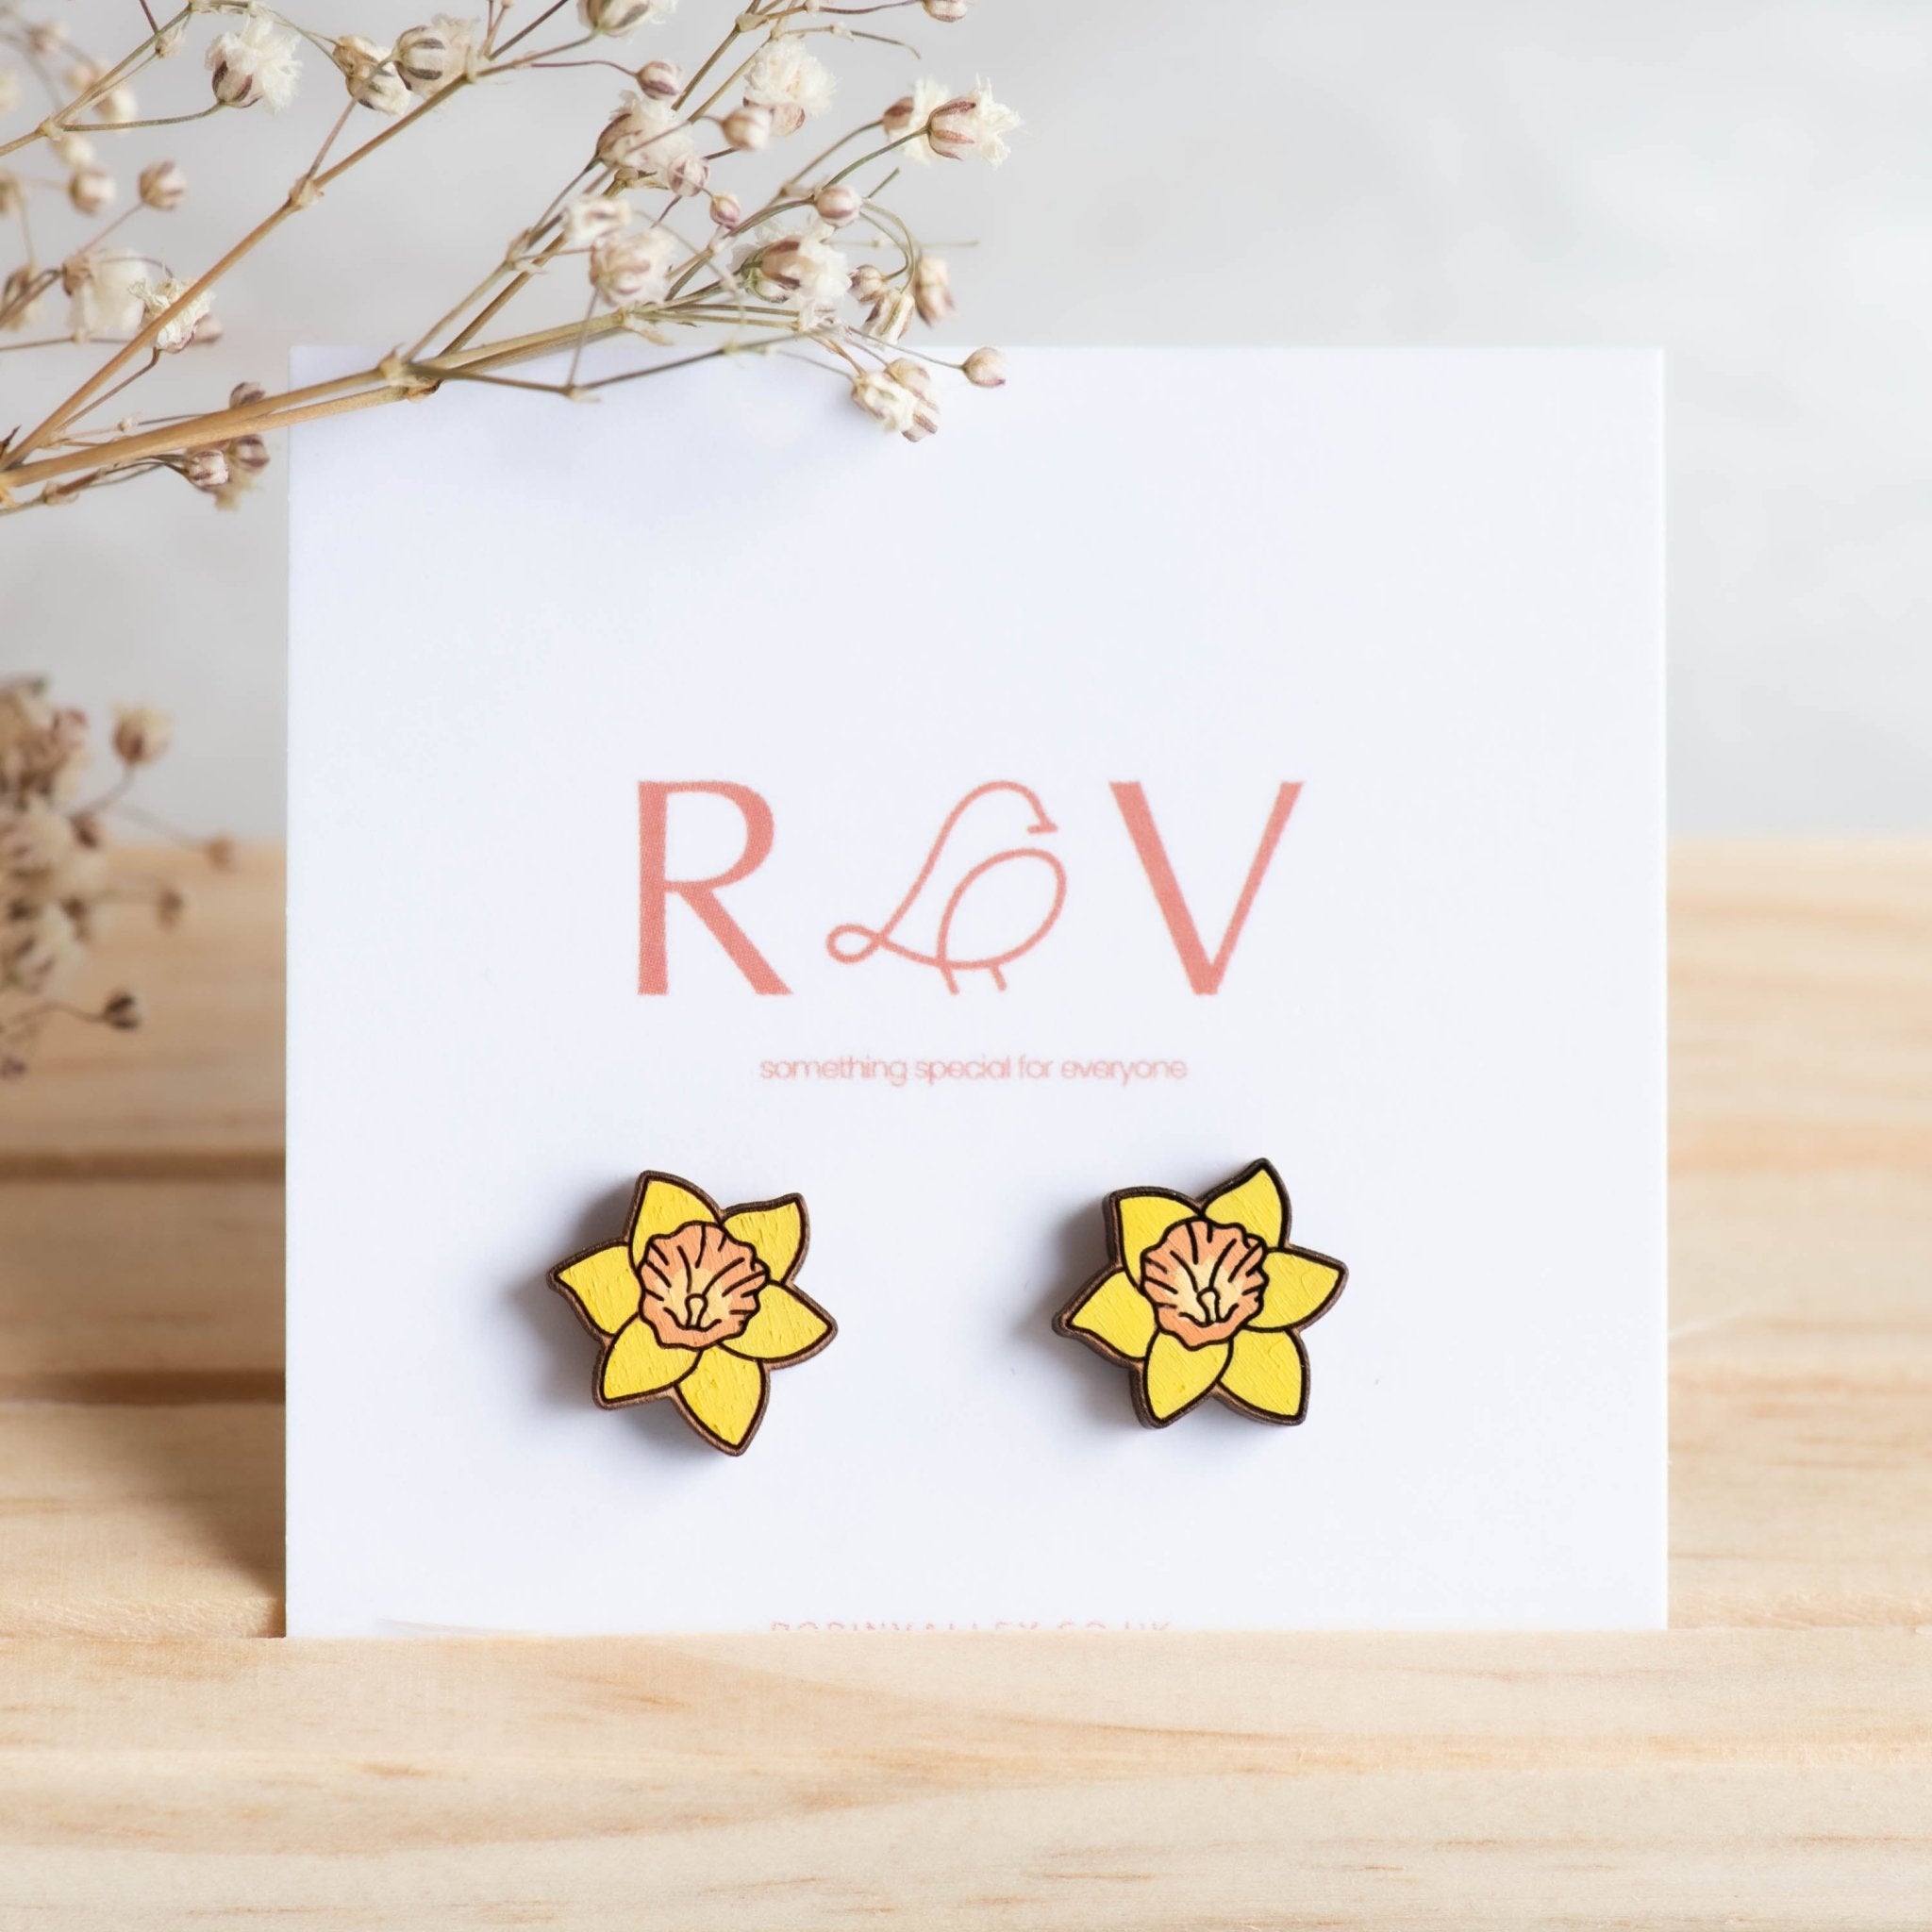 Hand-painted Daffodil Flower Cherry Wood Stud Earrings - PEO14077 - Robin Valley Official Store